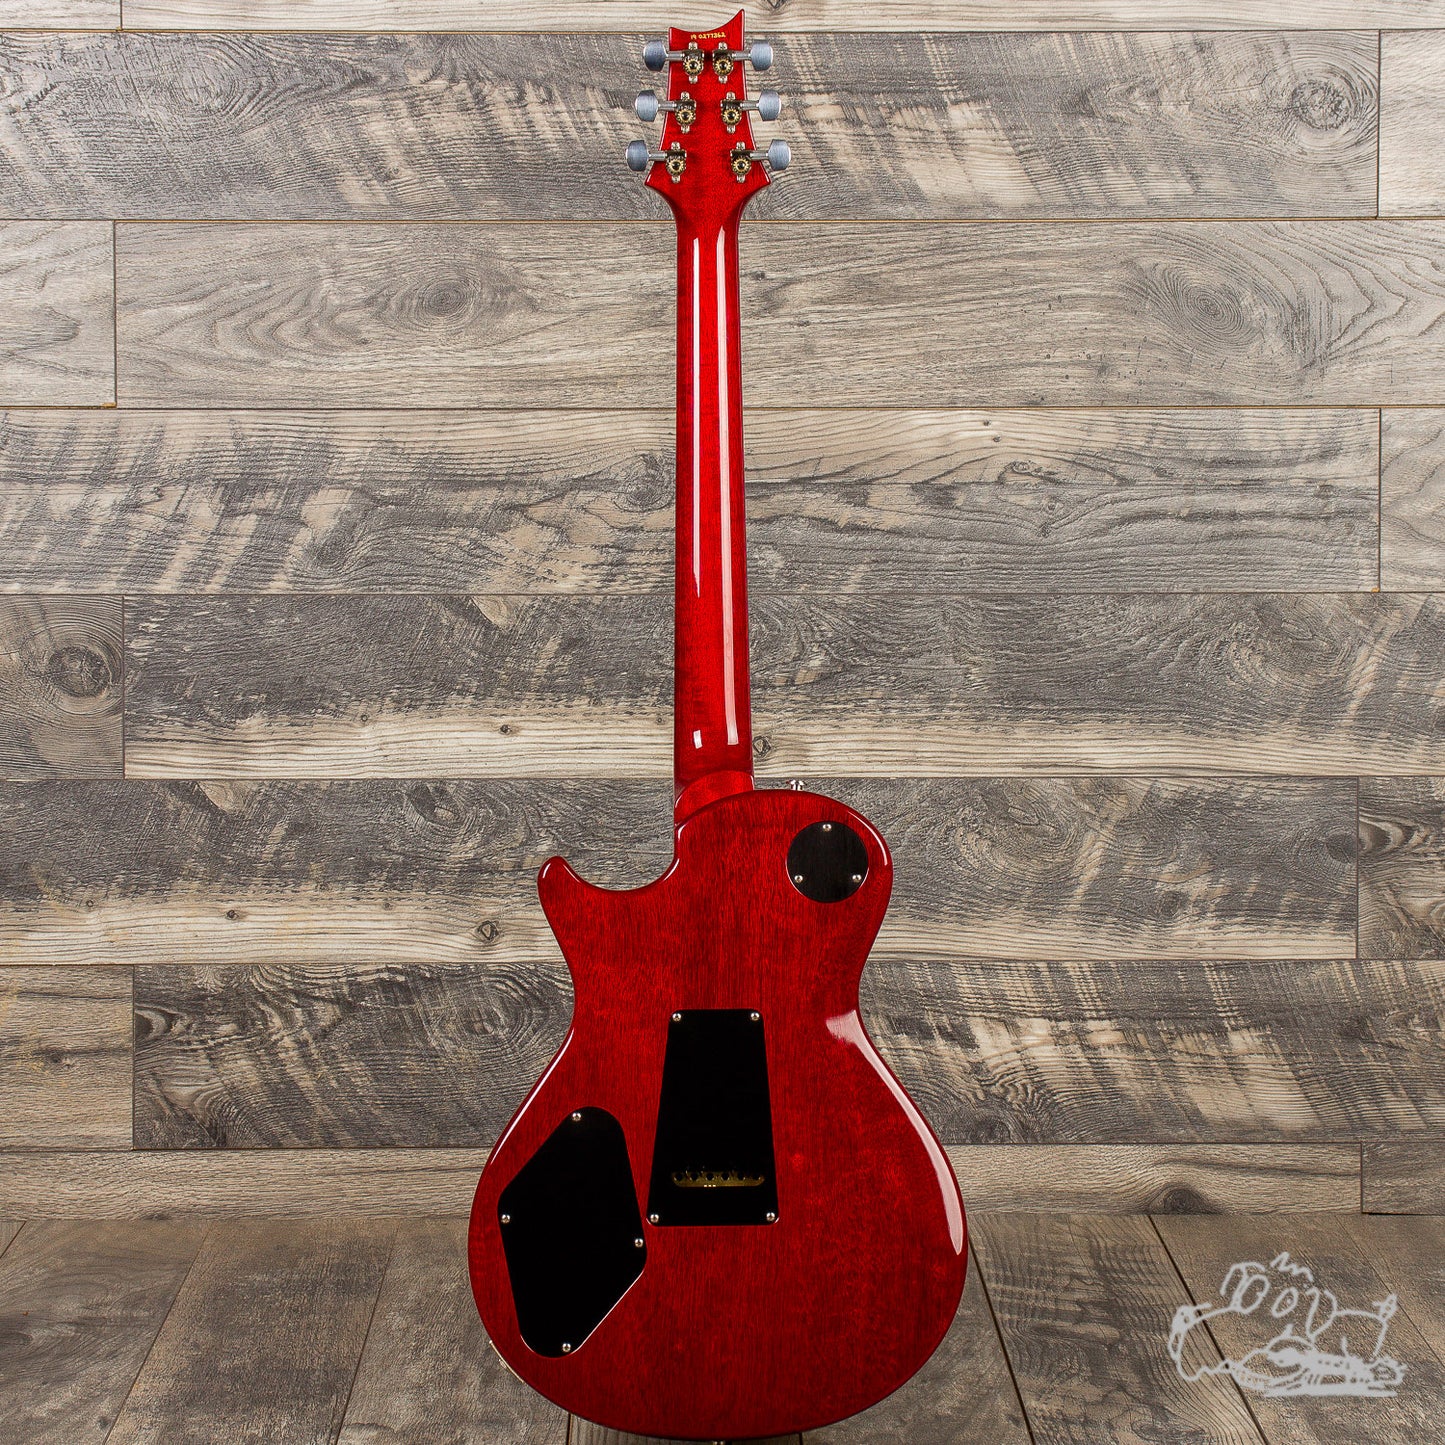 2019 PRS Tremonti - Cherry Charcoal Burst - Make us an offer!